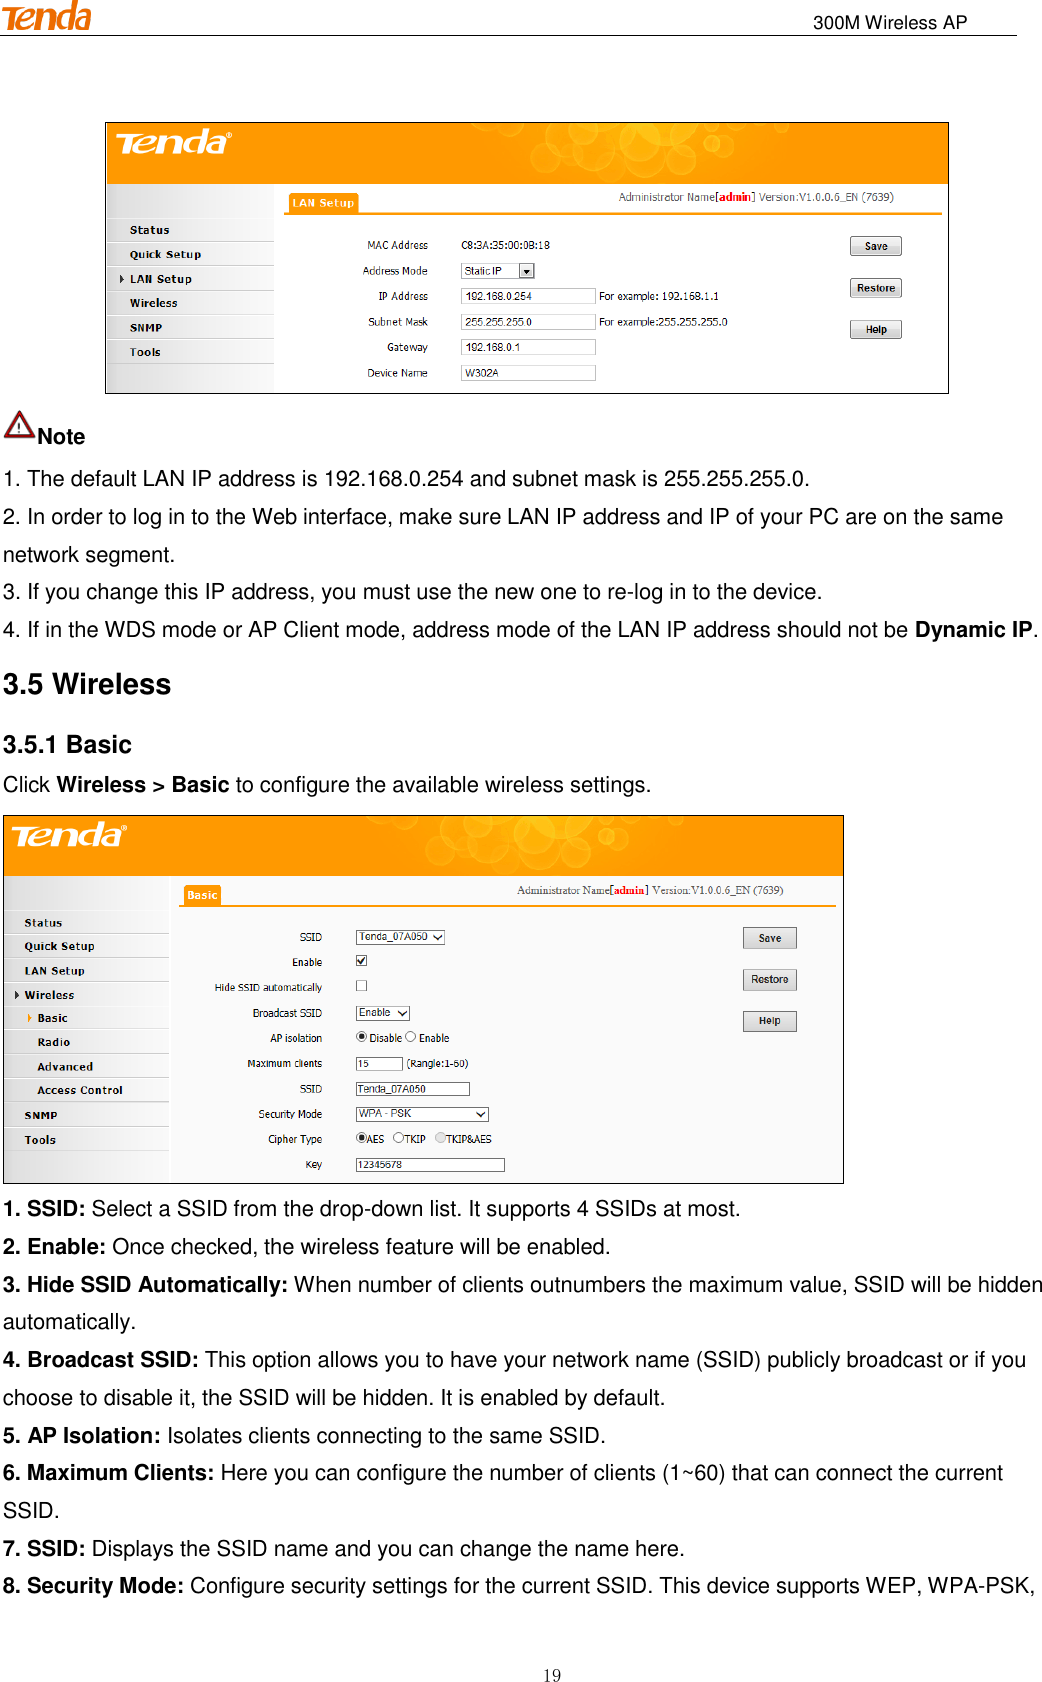                                                                              300M Wireless AP 19  Note   1. The default LAN IP address is 192.168.0.254 and subnet mask is 255.255.255.0. 2. In order to log in to the Web interface, make sure LAN IP address and IP of your PC are on the same network segment. 3. If you change this IP address, you must use the new one to re-log in to the device. 4. If in the WDS mode or AP Client mode, address mode of the LAN IP address should not be Dynamic IP. 3.5 Wireless 3.5.1 Basic Click Wireless &gt; Basic to configure the available wireless settings.  1. SSID: Select a SSID from the drop-down list. It supports 4 SSIDs at most. 2. Enable: Once checked, the wireless feature will be enabled. 3. Hide SSID Automatically: When number of clients outnumbers the maximum value, SSID will be hidden automatically. 4. Broadcast SSID: This option allows you to have your network name (SSID) publicly broadcast or if you choose to disable it, the SSID will be hidden. It is enabled by default. 5. AP Isolation: Isolates clients connecting to the same SSID. 6. Maximum Clients: Here you can configure the number of clients (1~60) that can connect the current SSID. 7. SSID: Displays the SSID name and you can change the name here. 8. Security Mode: Configure security settings for the current SSID. This device supports WEP, WPA-PSK, 